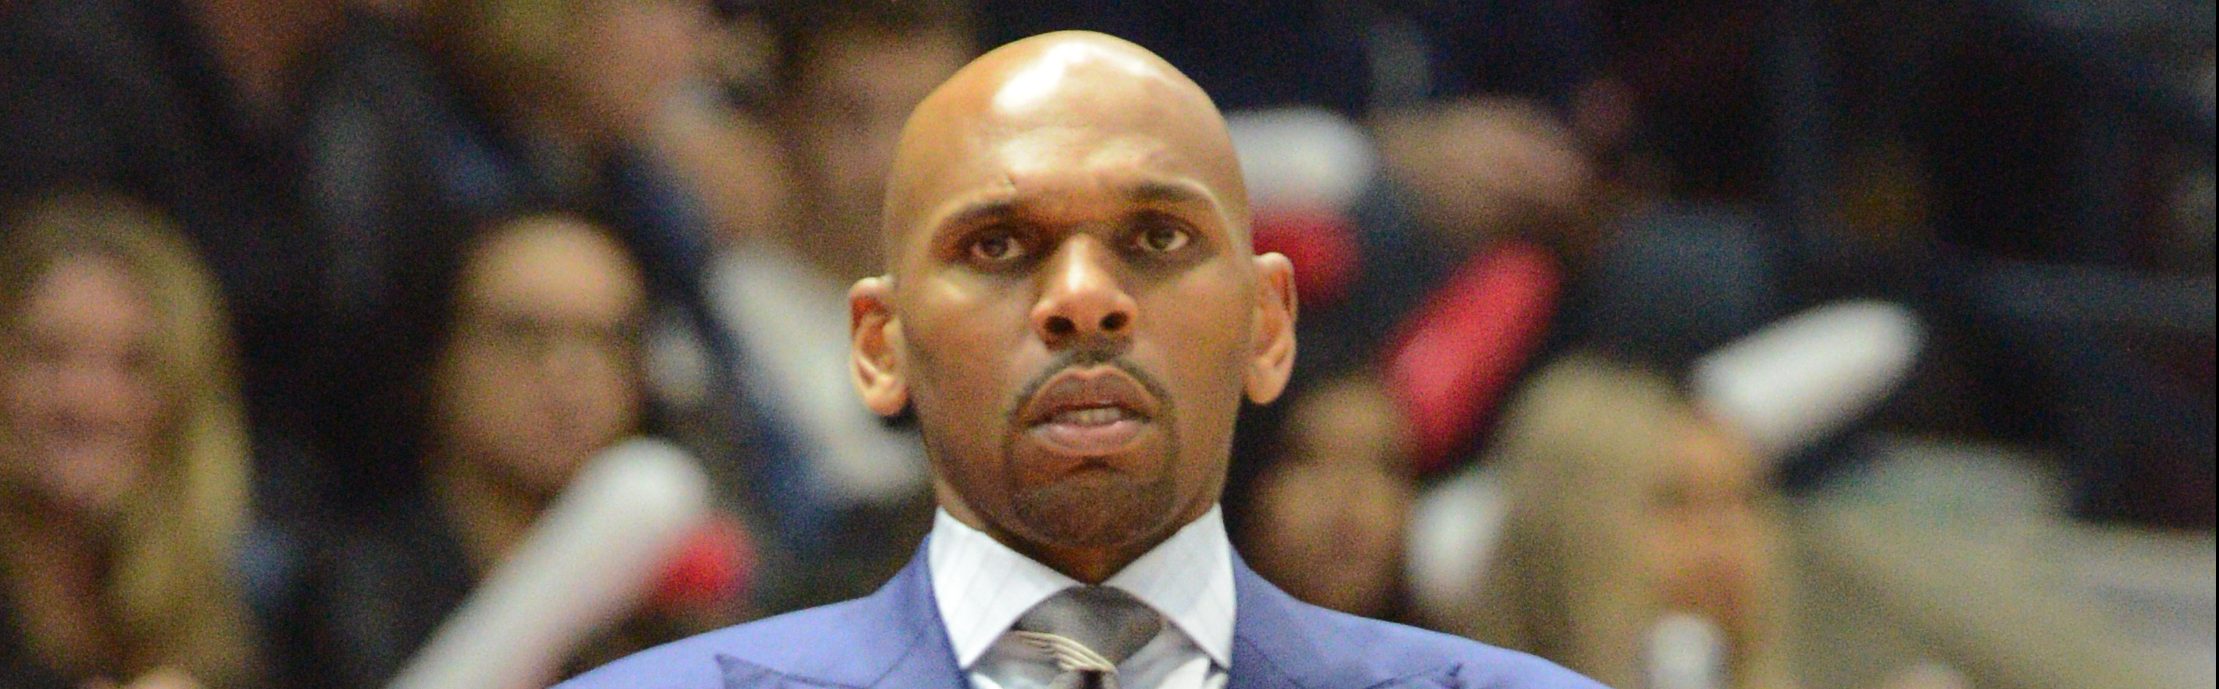 Jerry Stackhouse opens up about the challenge of being compared to